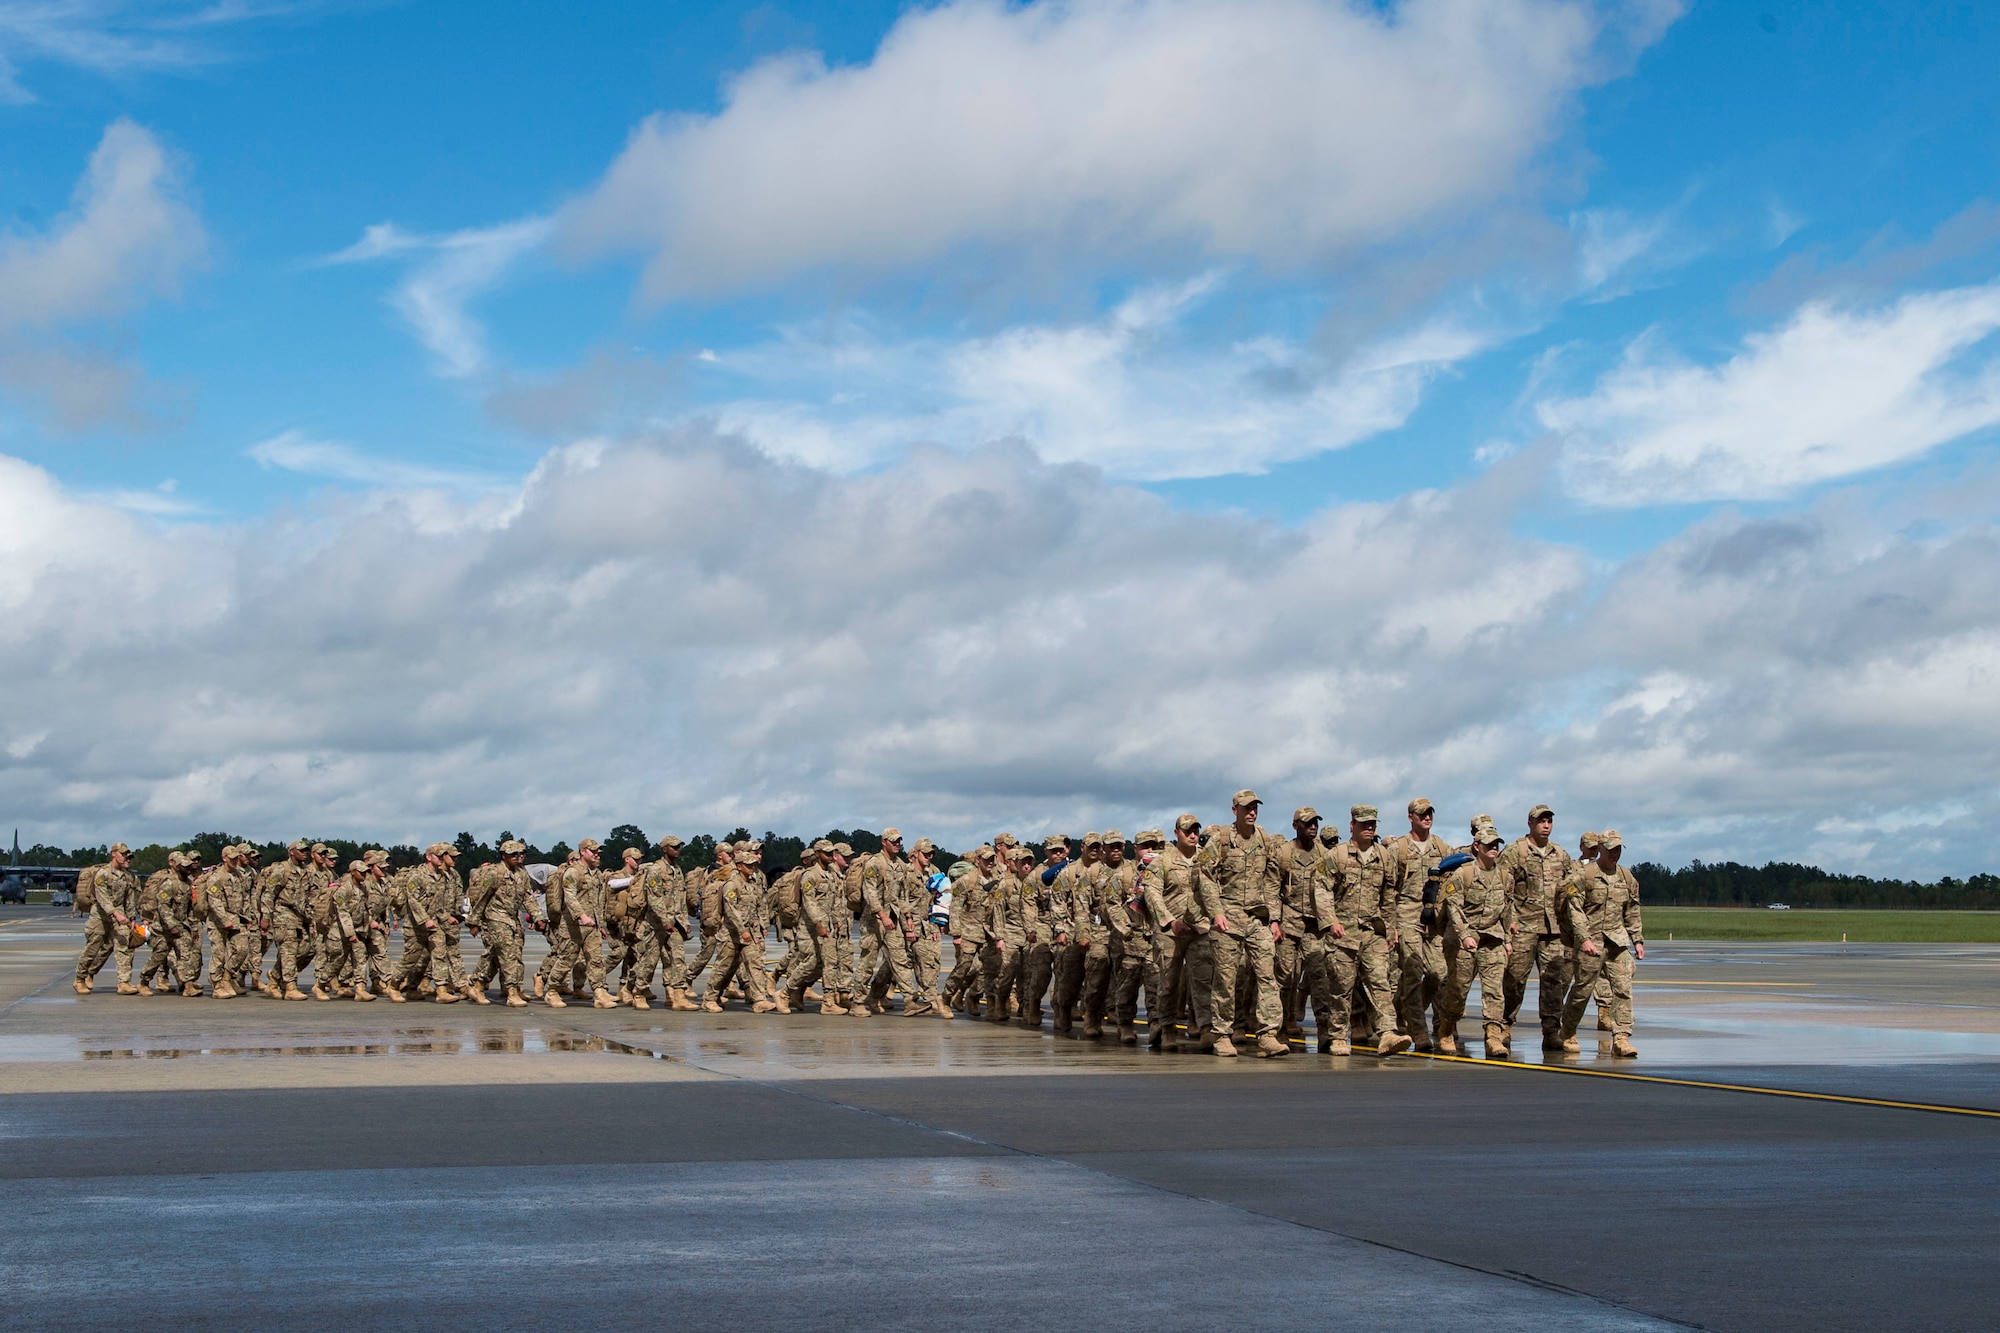 The 823d Base Defense Squadron (BDS) march on the flightline during a redeployment, Oct. 26, 2017, at Moody Air Force Base, Ga. The 822d, 823d and 824th BDS’s provide high-risk force protection and integrated base defense for expeditionary air forces. Airmen from the 823d BDS just returned home from conducting relief-in-place in the United States Africa Command theater while Airmen from the 824th BDS took their place. (U.S. Air Force photo by Senior Airman Janiqua P. Robinson)